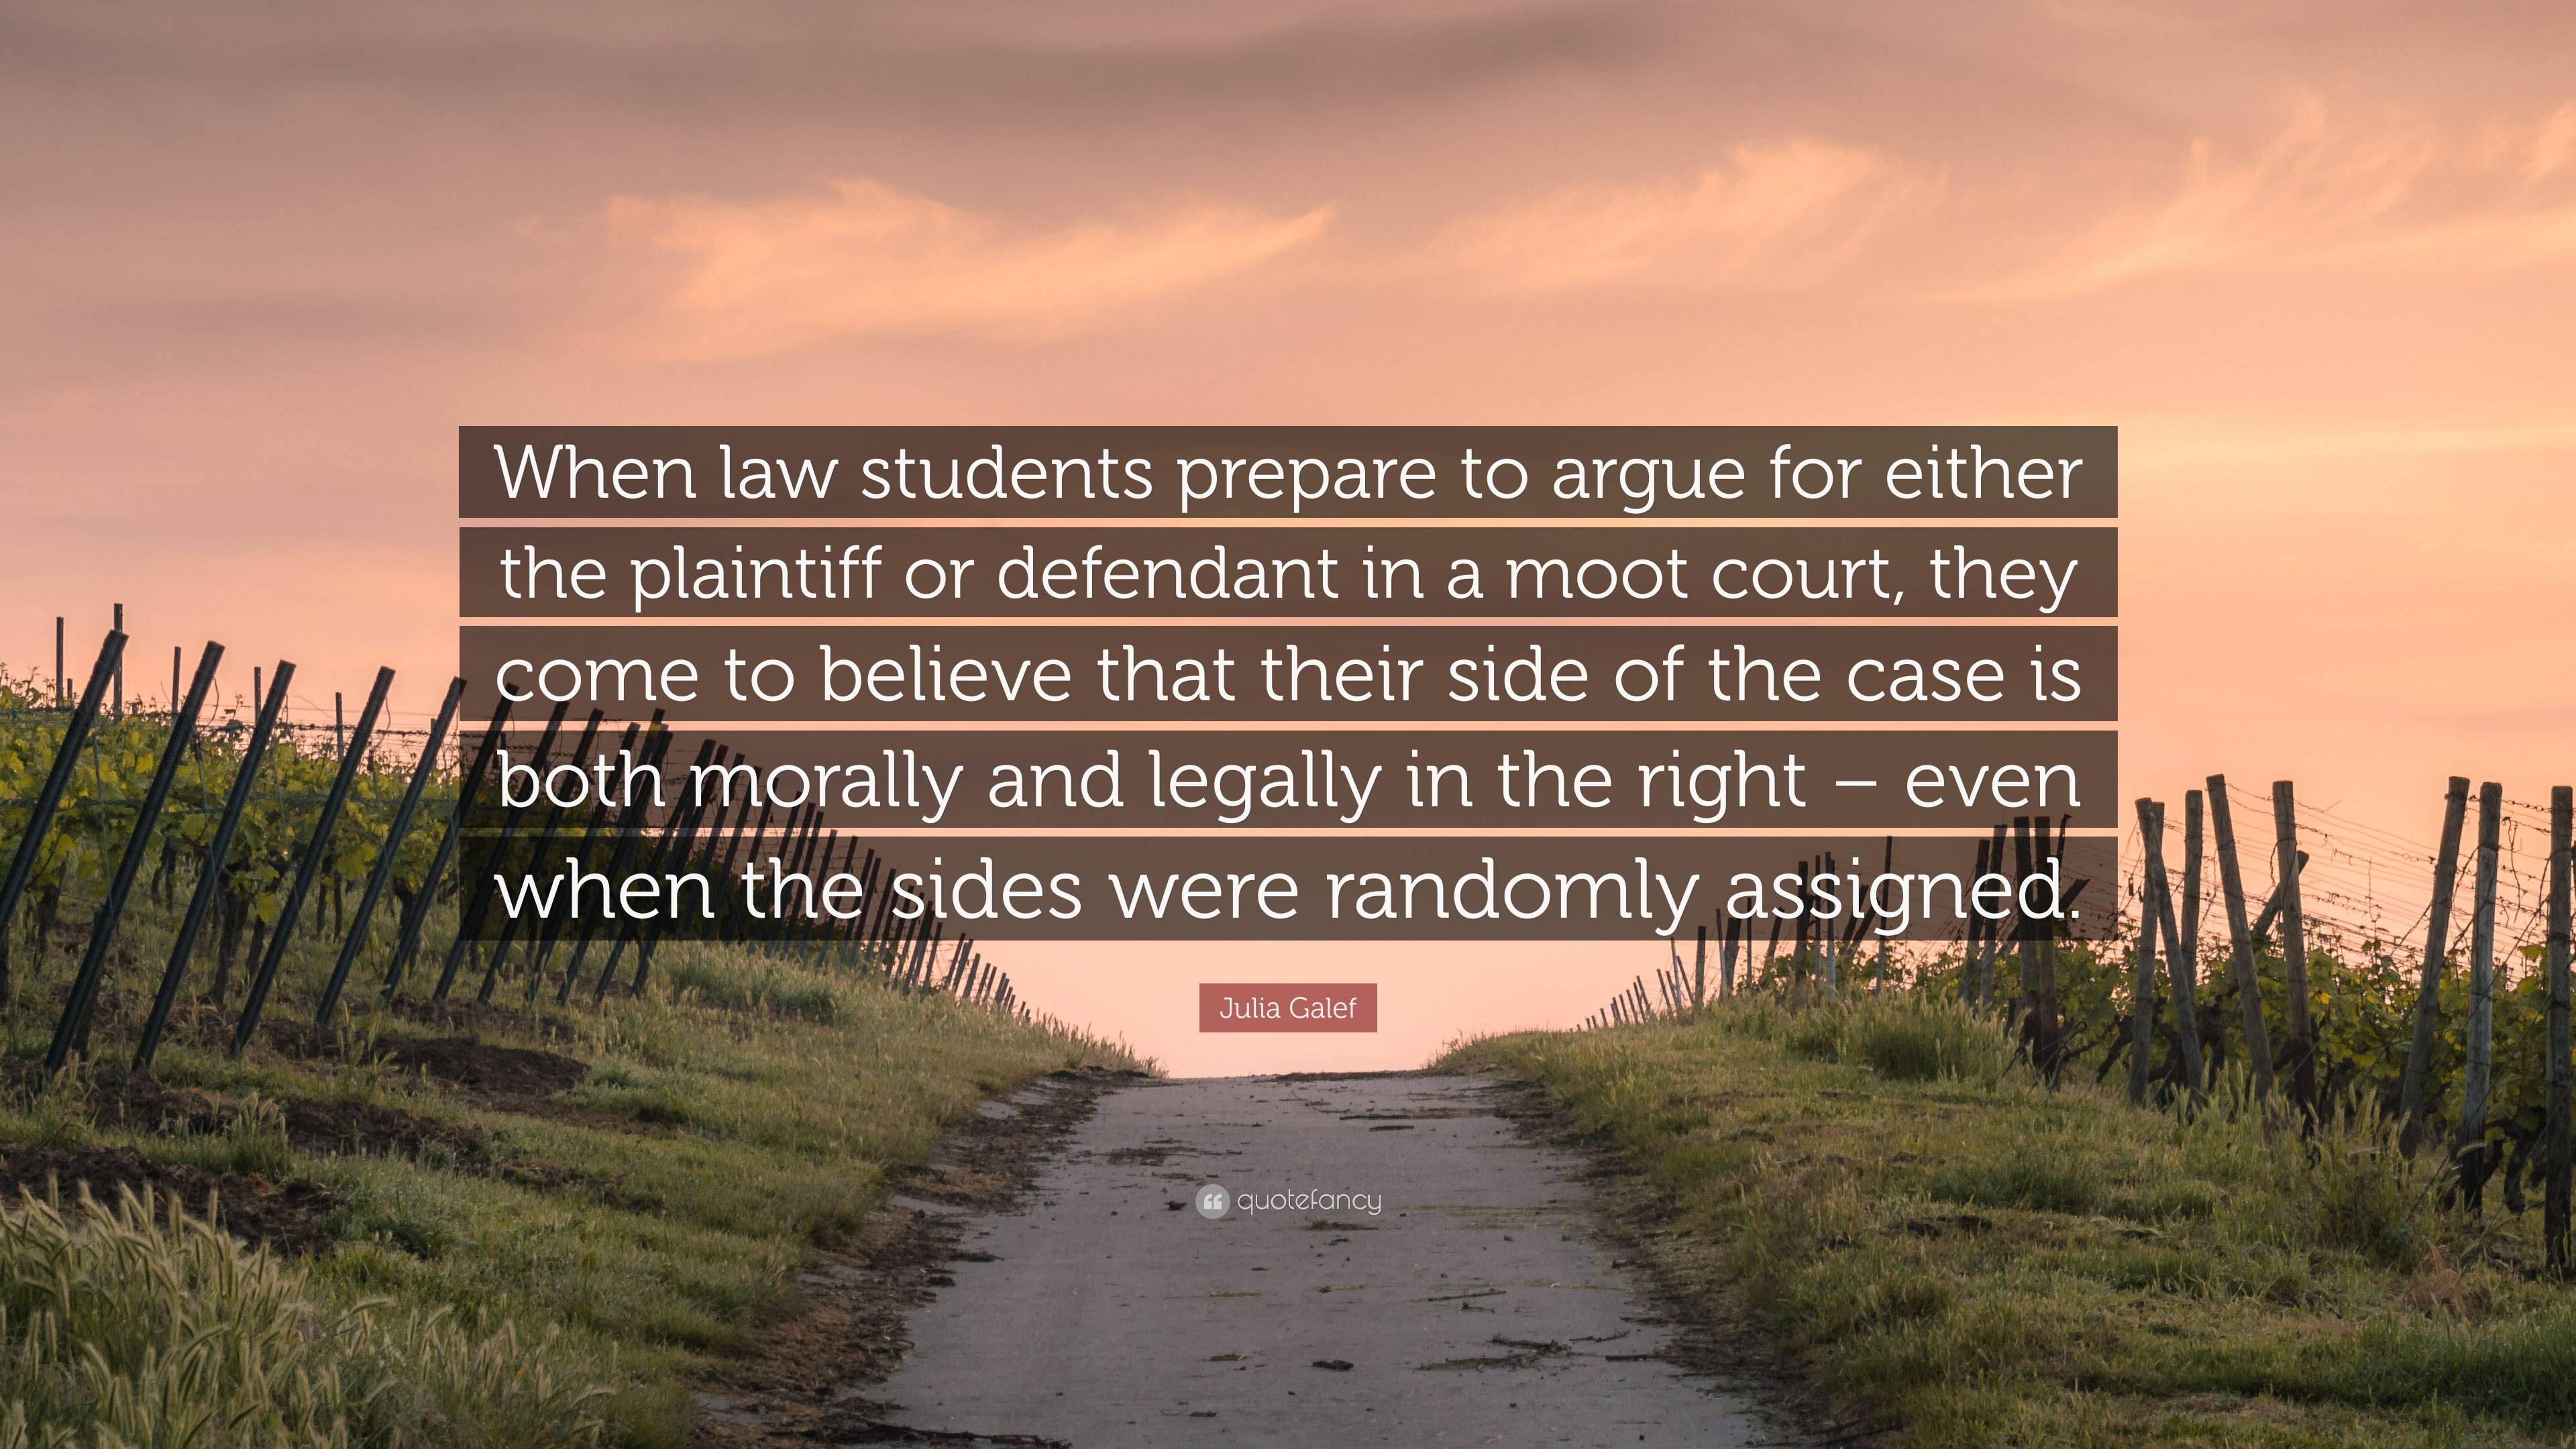 Julia Galef Quote: When law students prepare to argue for either the